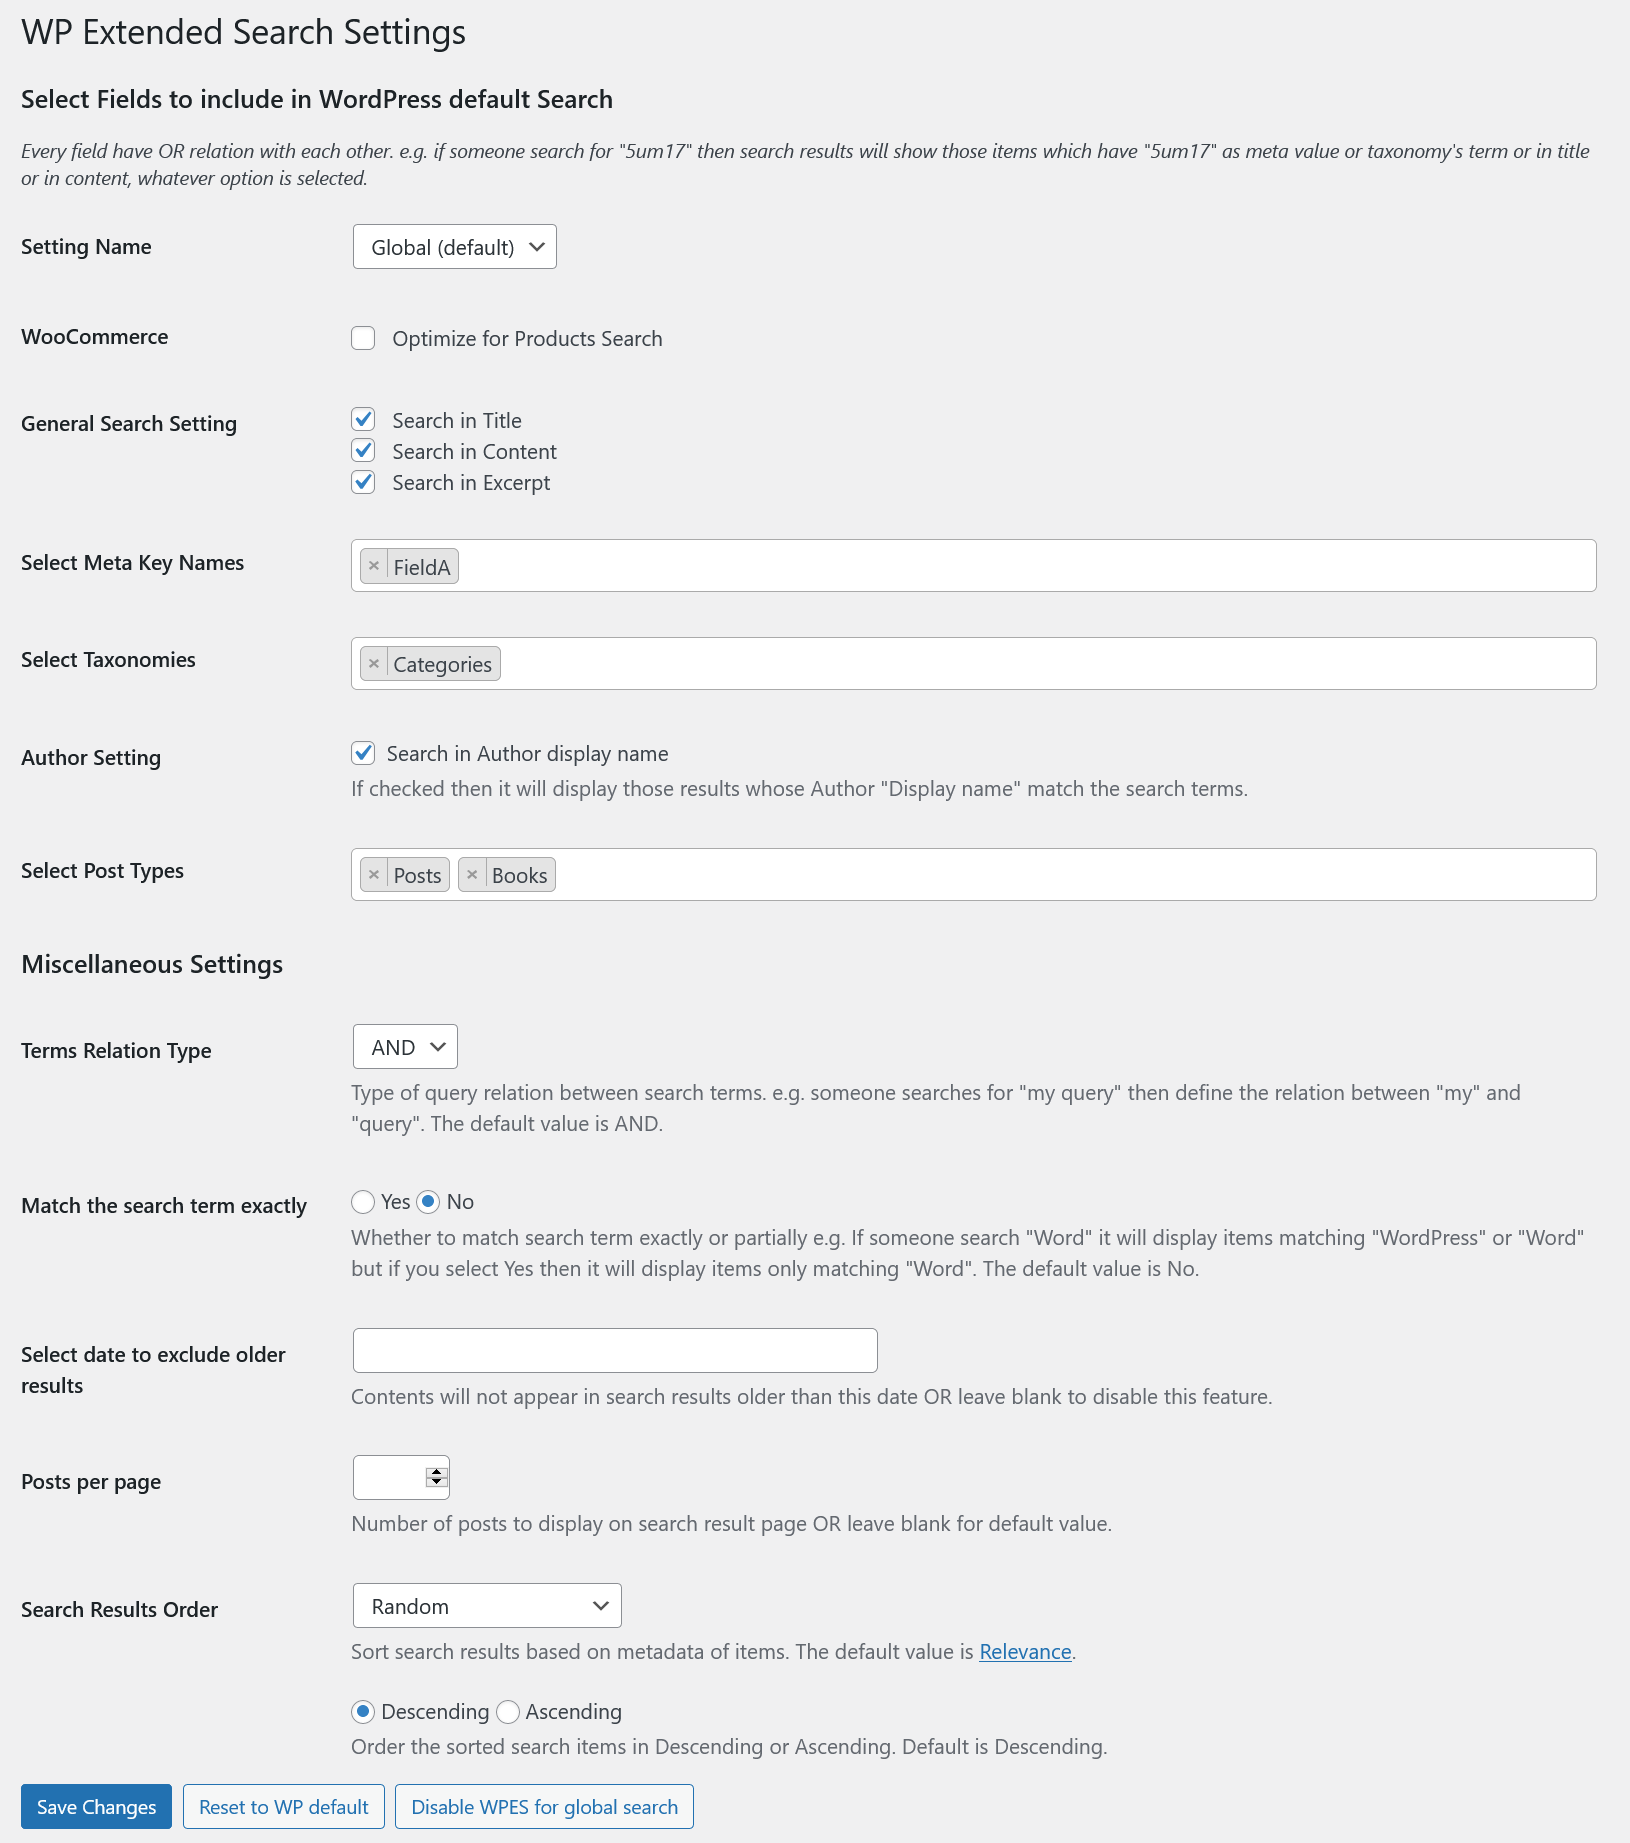 WP Extented Search settings page